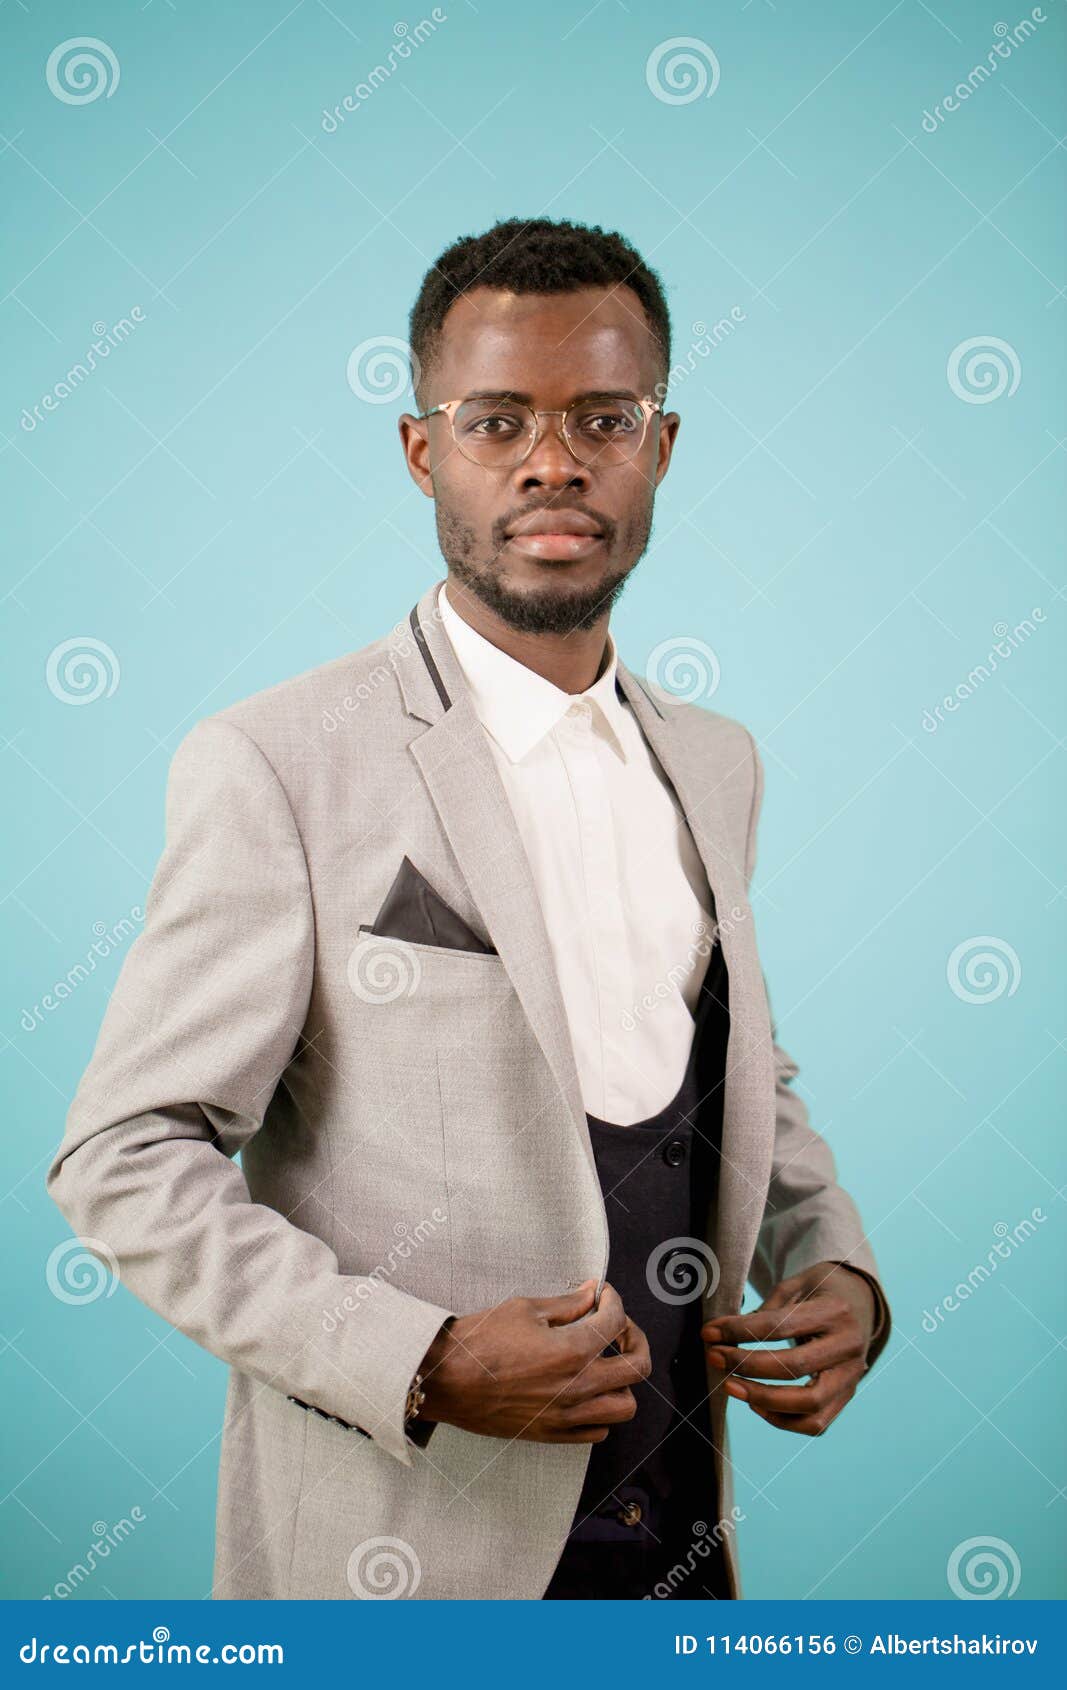 africanamerican black man wearing glasses in stylish clothers